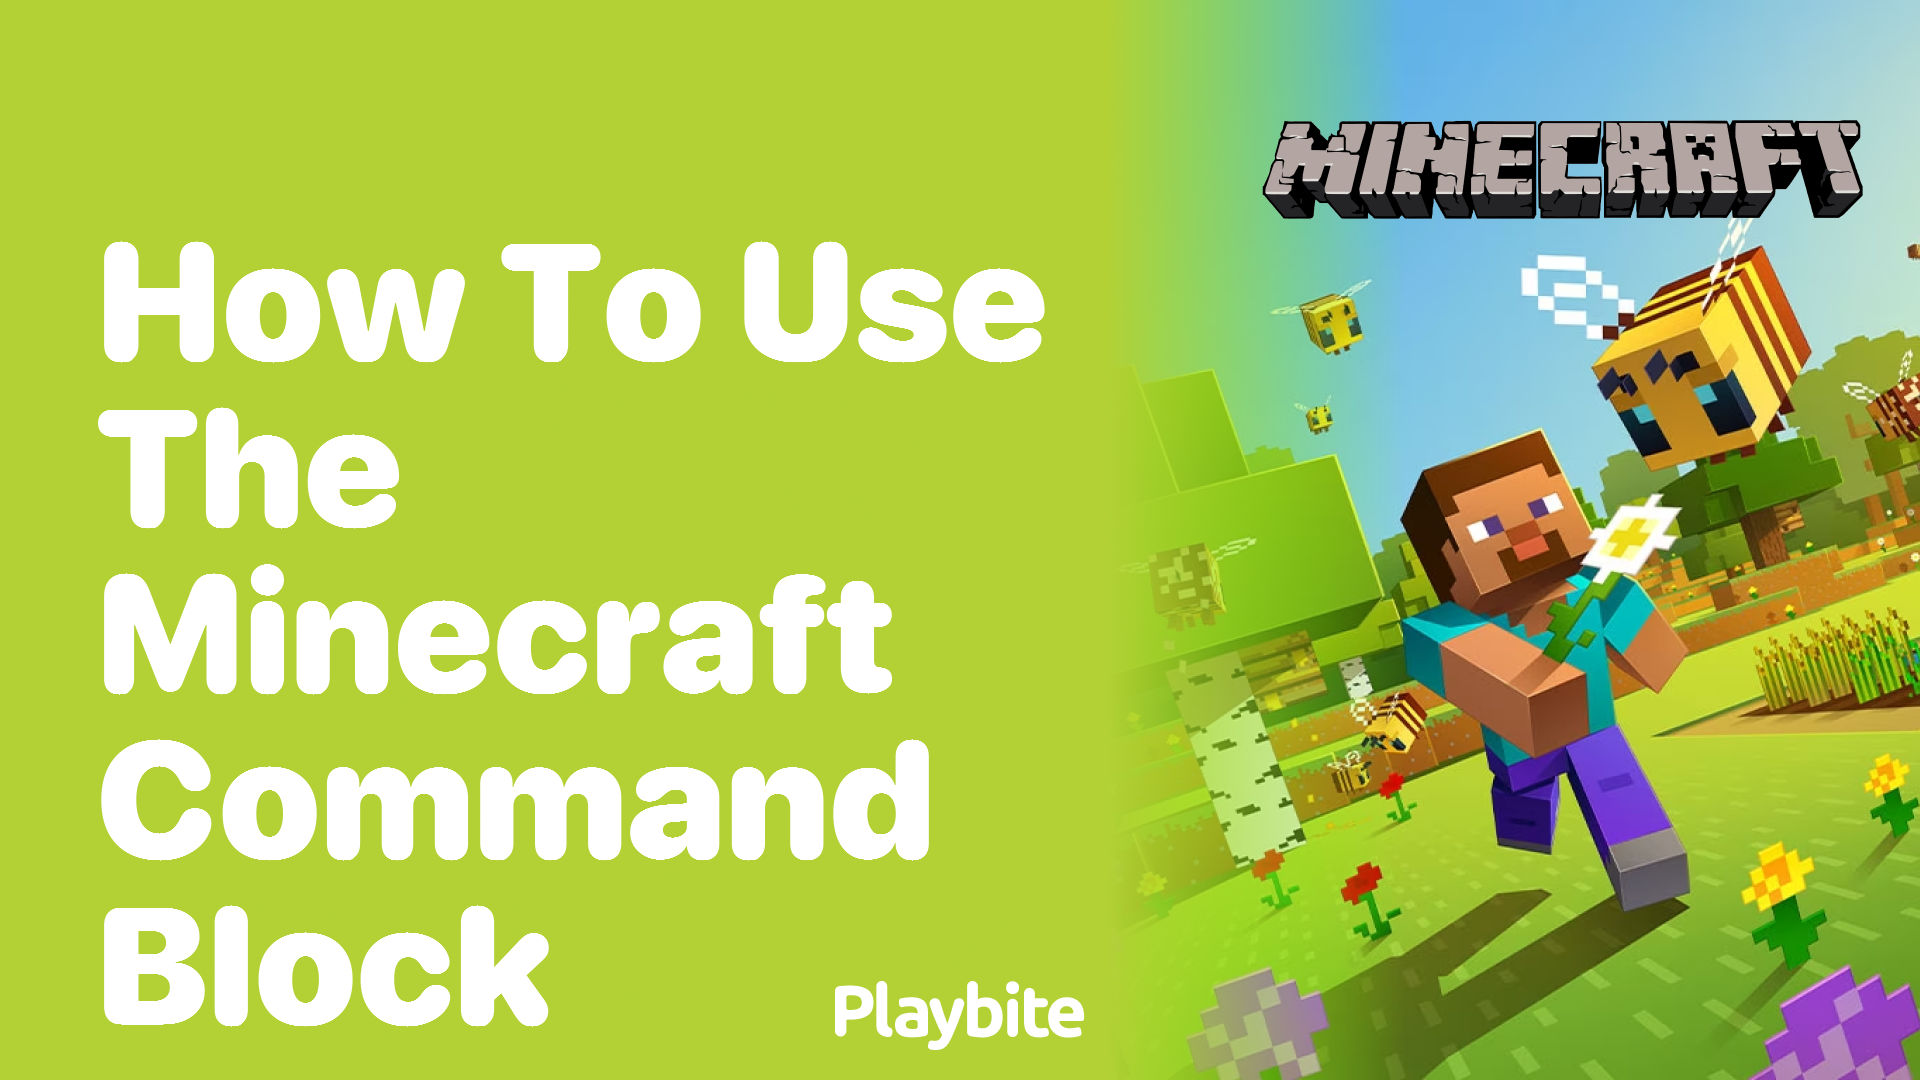 How to Use the Minecraft Command Block: A Simple Guide